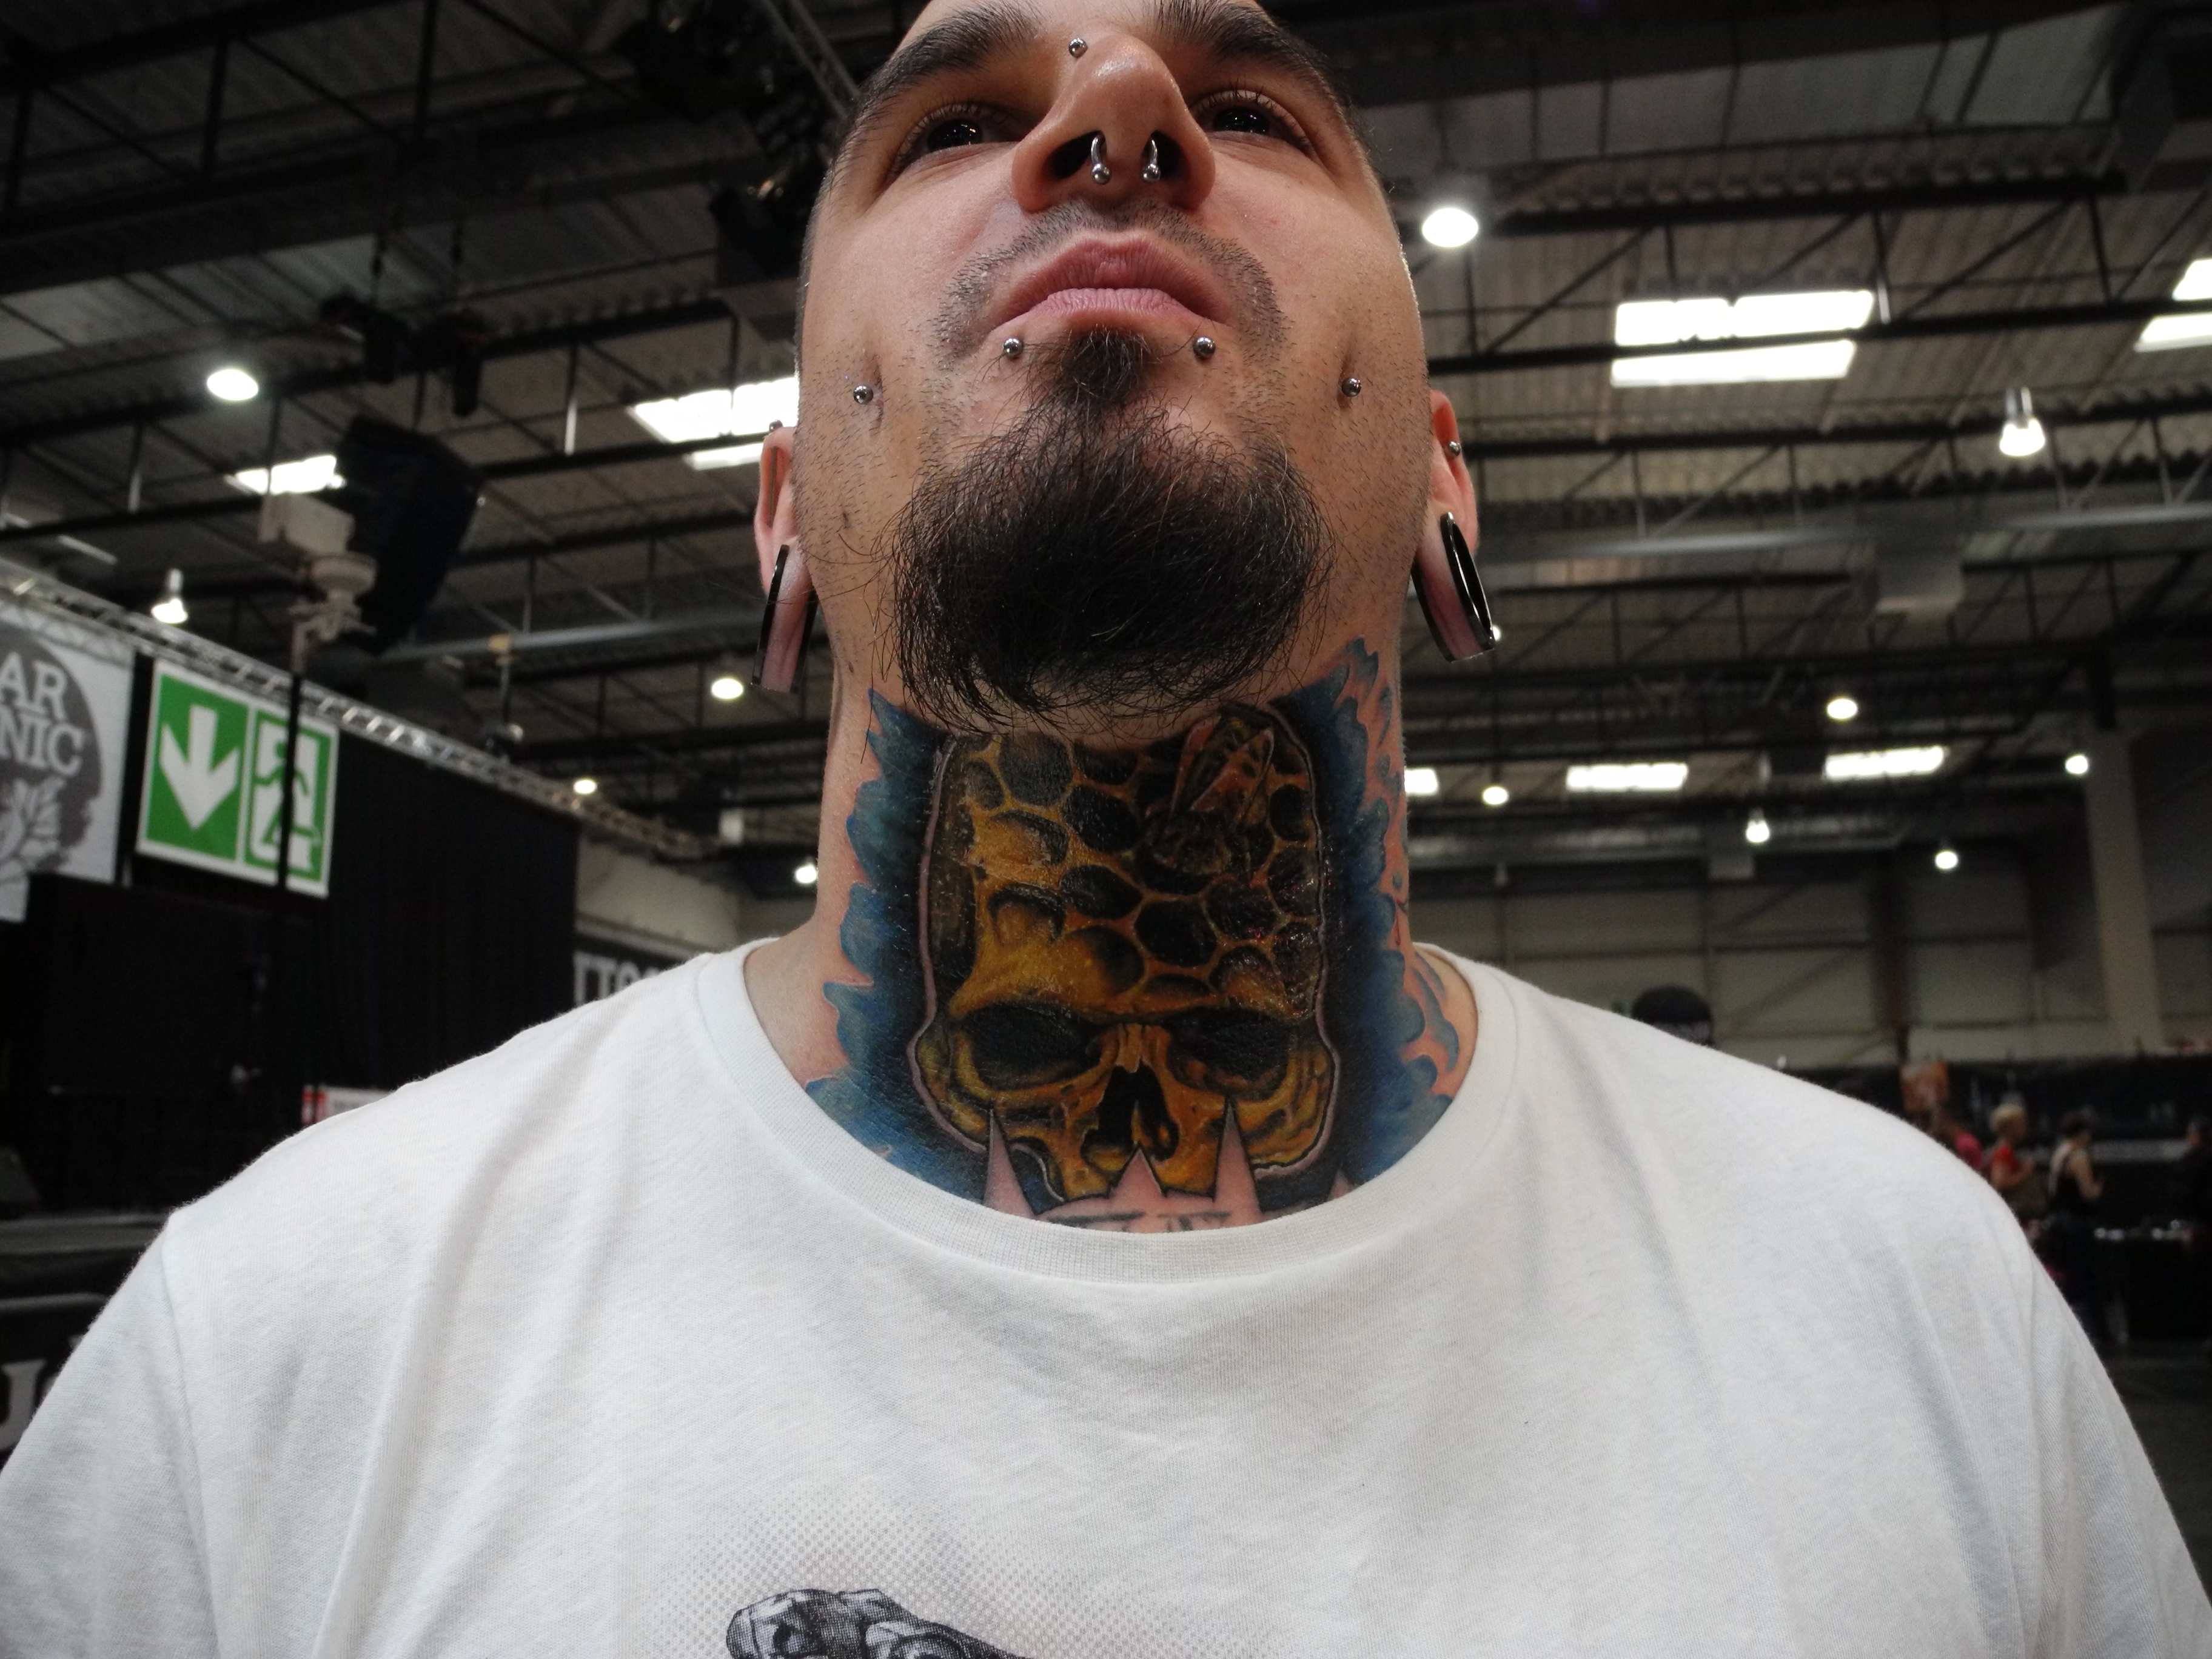 Reportink on tour: Tattoo Convention Dortmund 2015